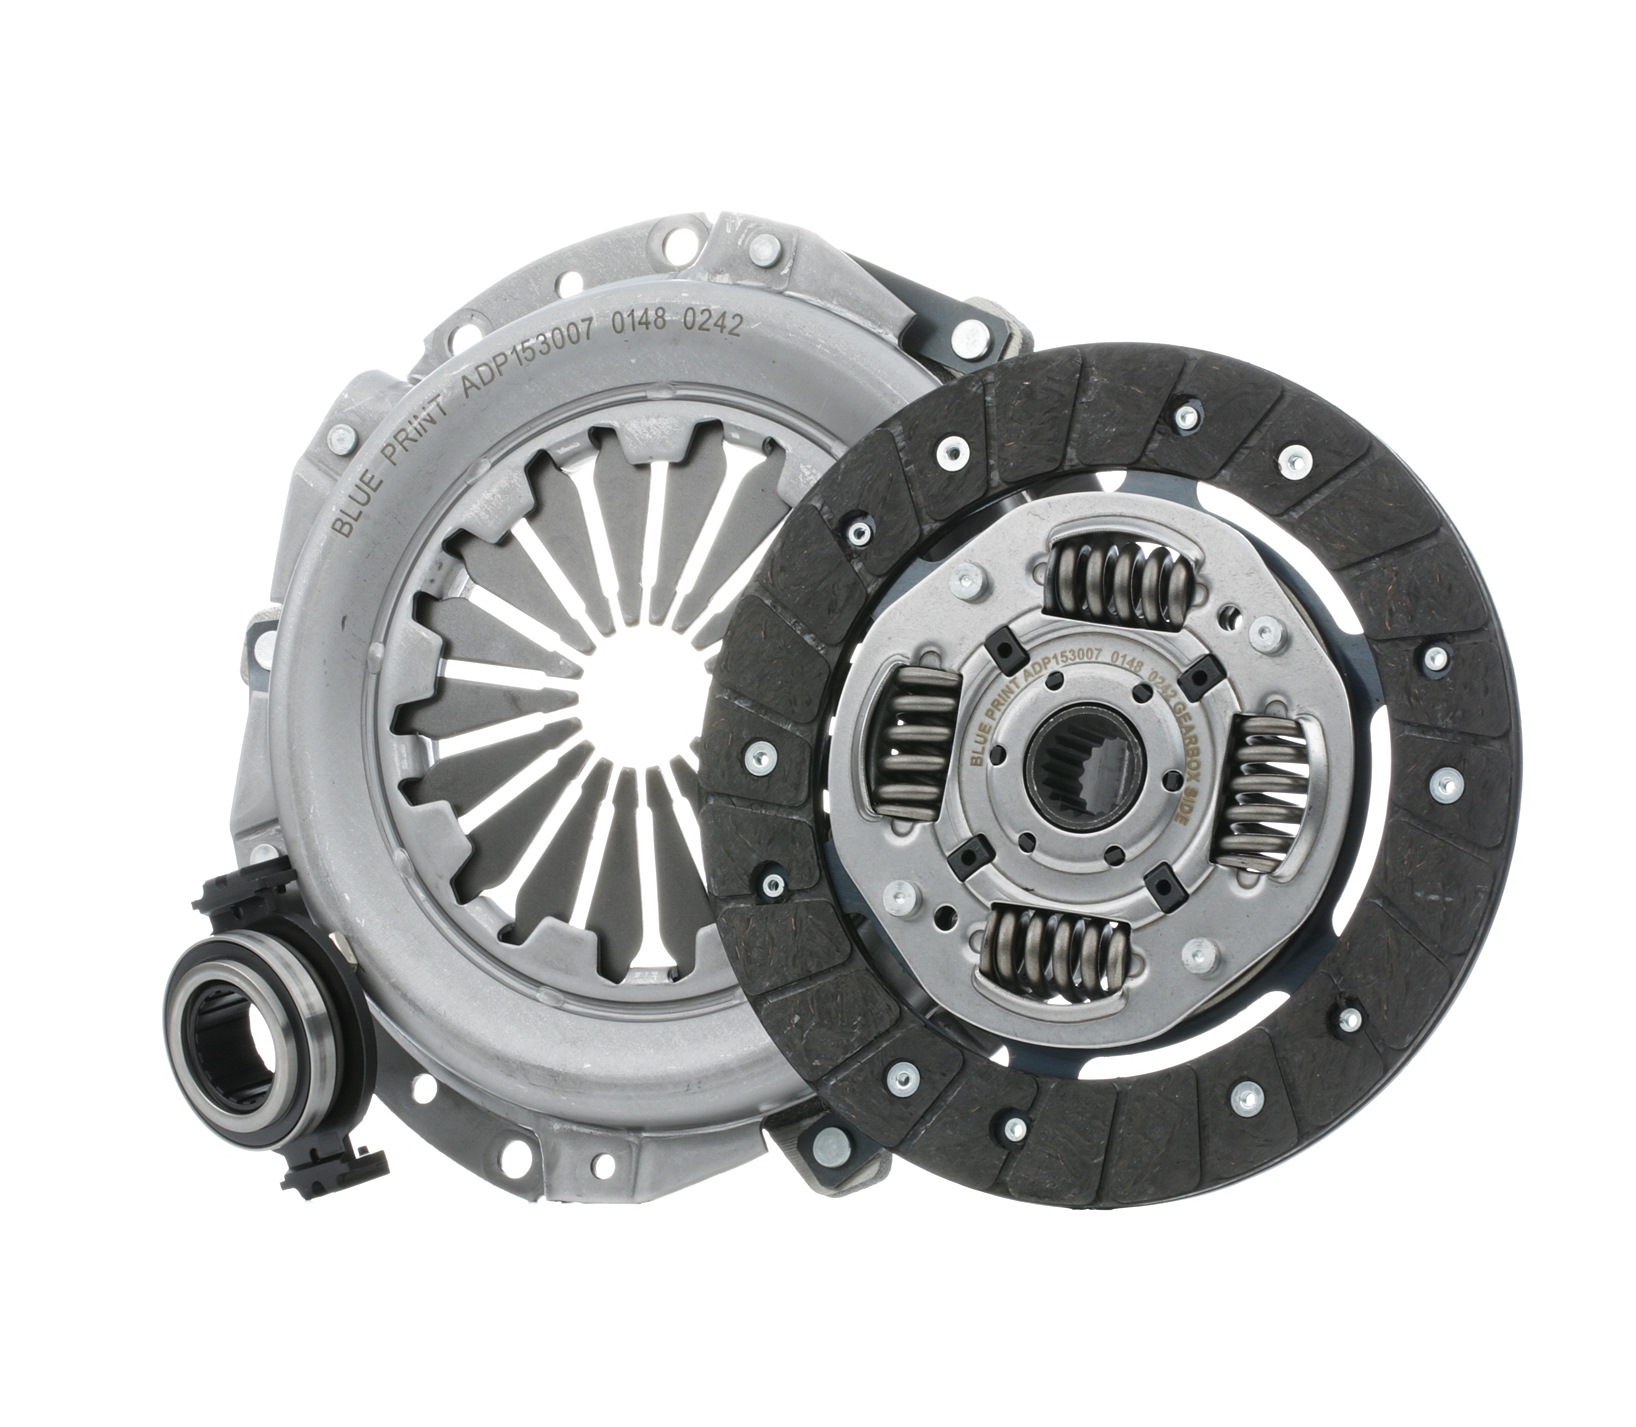 BLUE PRINT ADP153007 Clutch kit three-piece, with synthetic grease, with clutch release bearing, 181mm